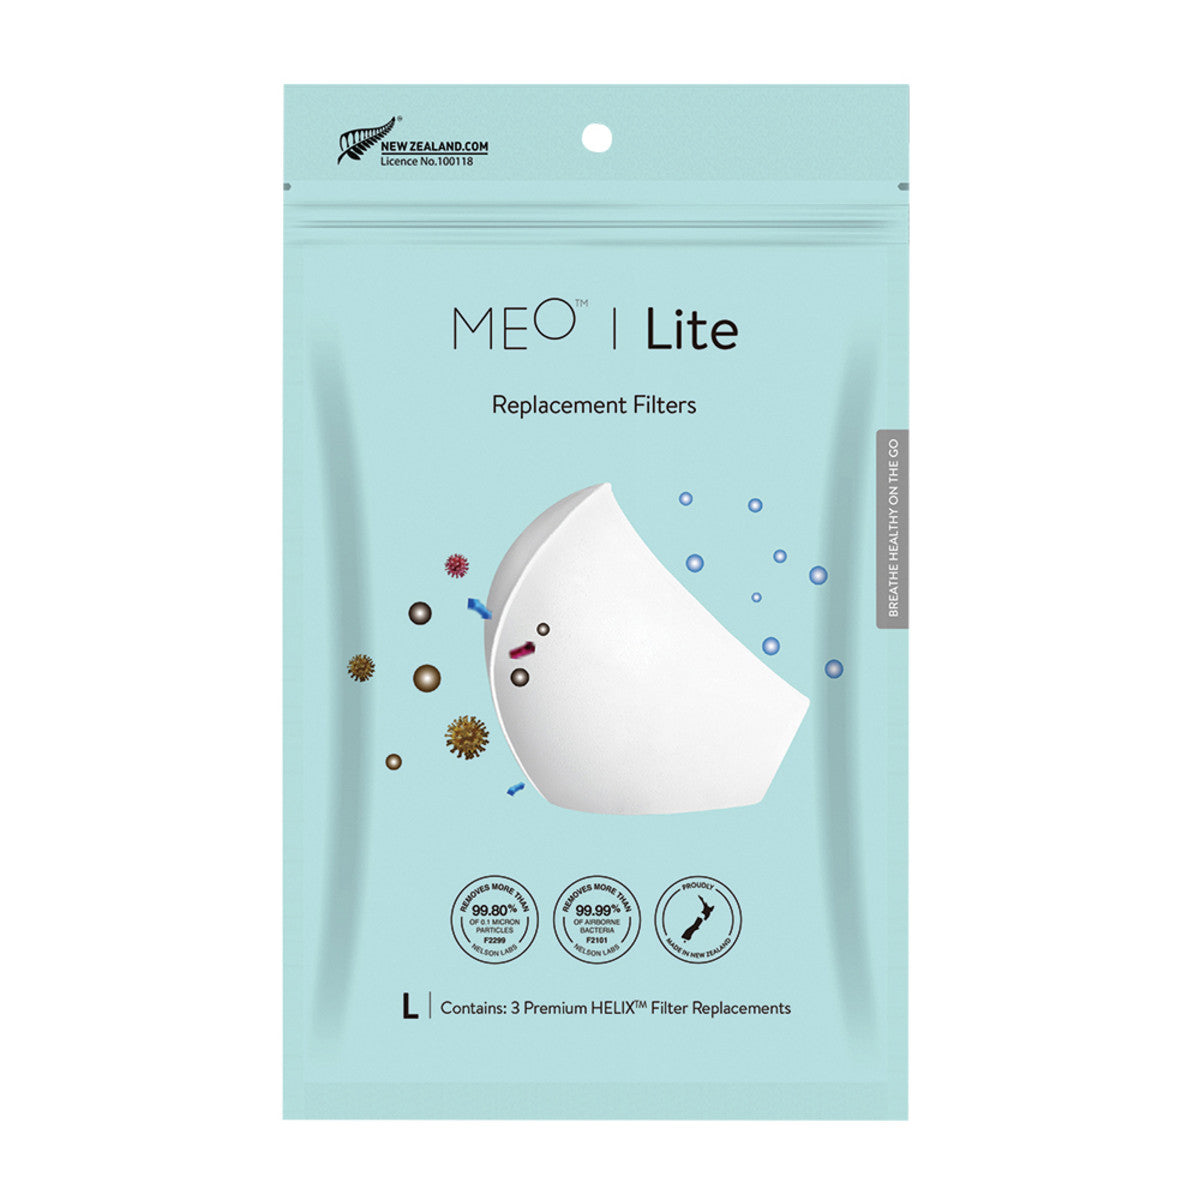 MEO - Lite Helix Replacement Filter x 3 Pack